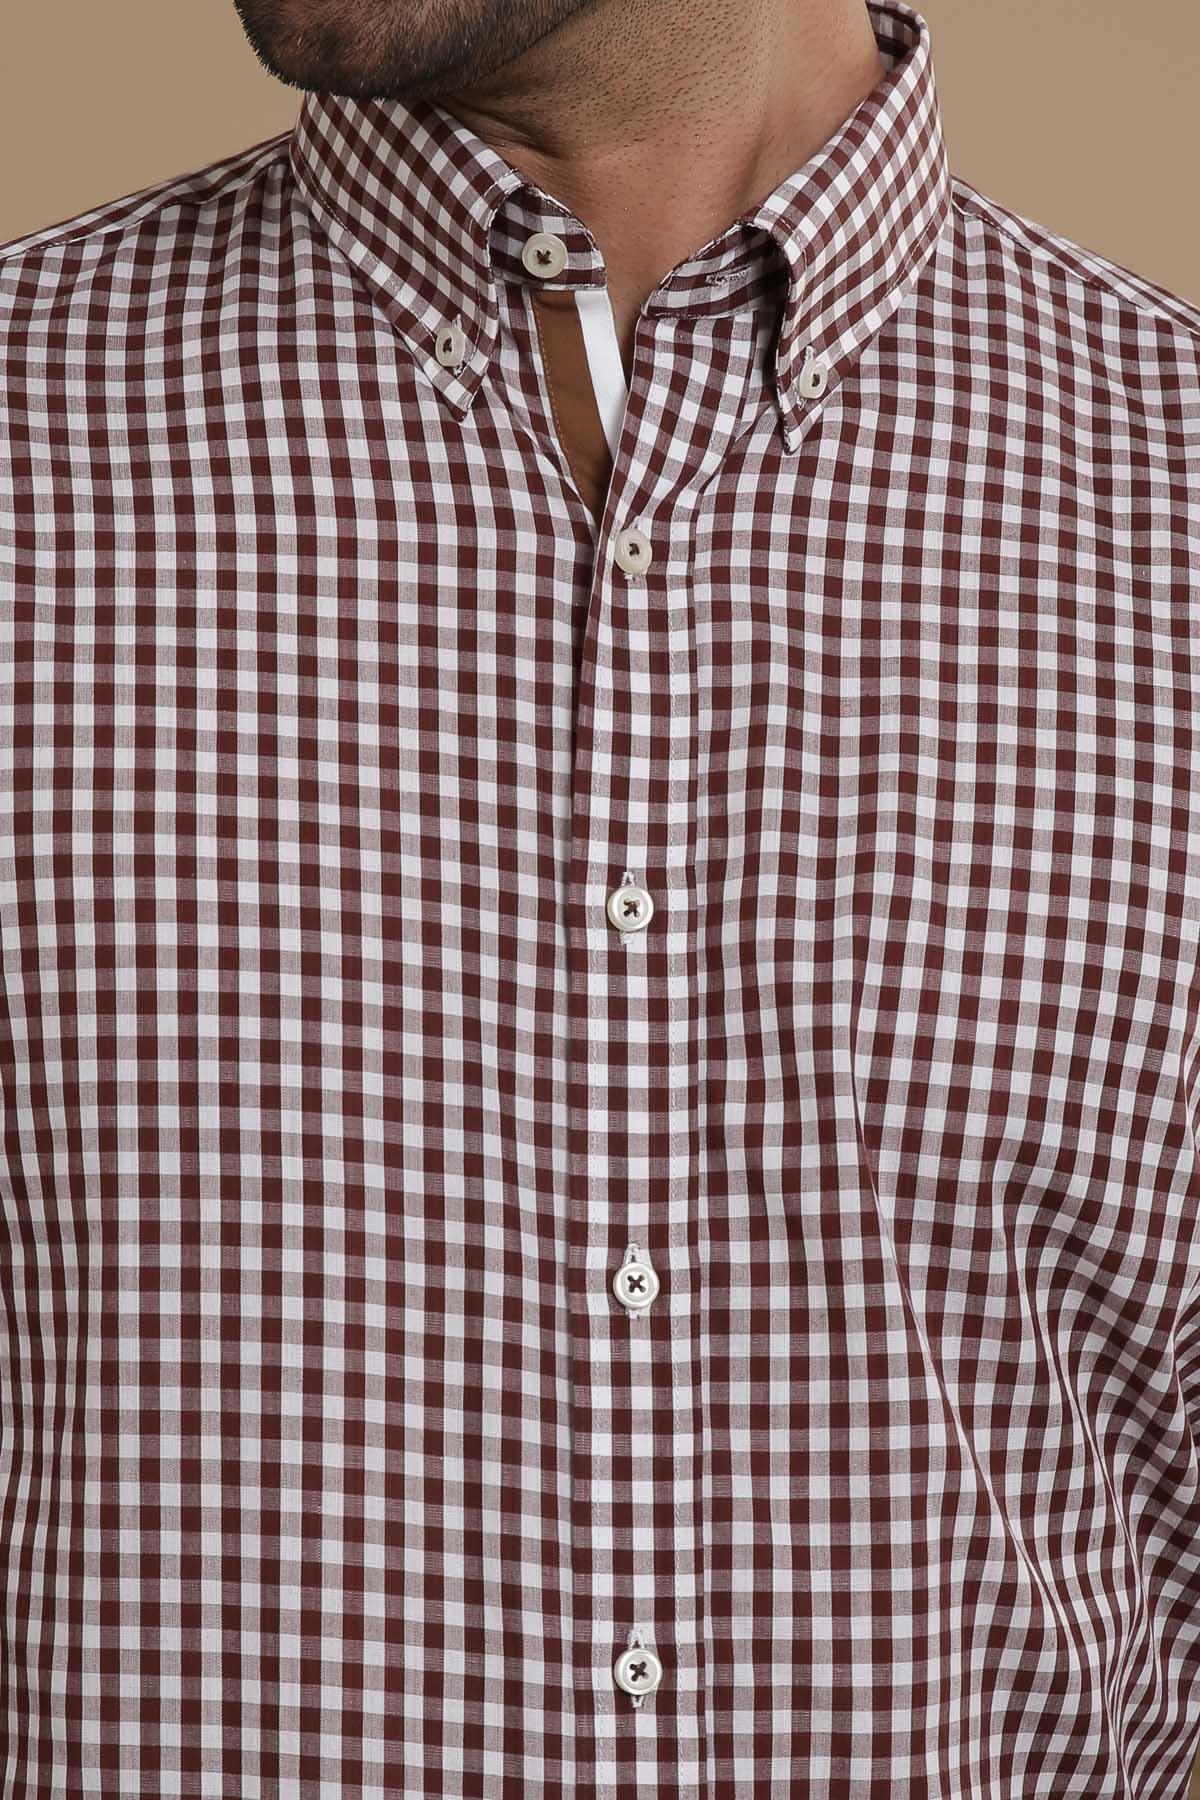 SEMI FORMAL SHIRTS BUTTON DOWN FULL SLEEVE SLIM FIT BROWN WHITE CHECK at Charcoal Clothing